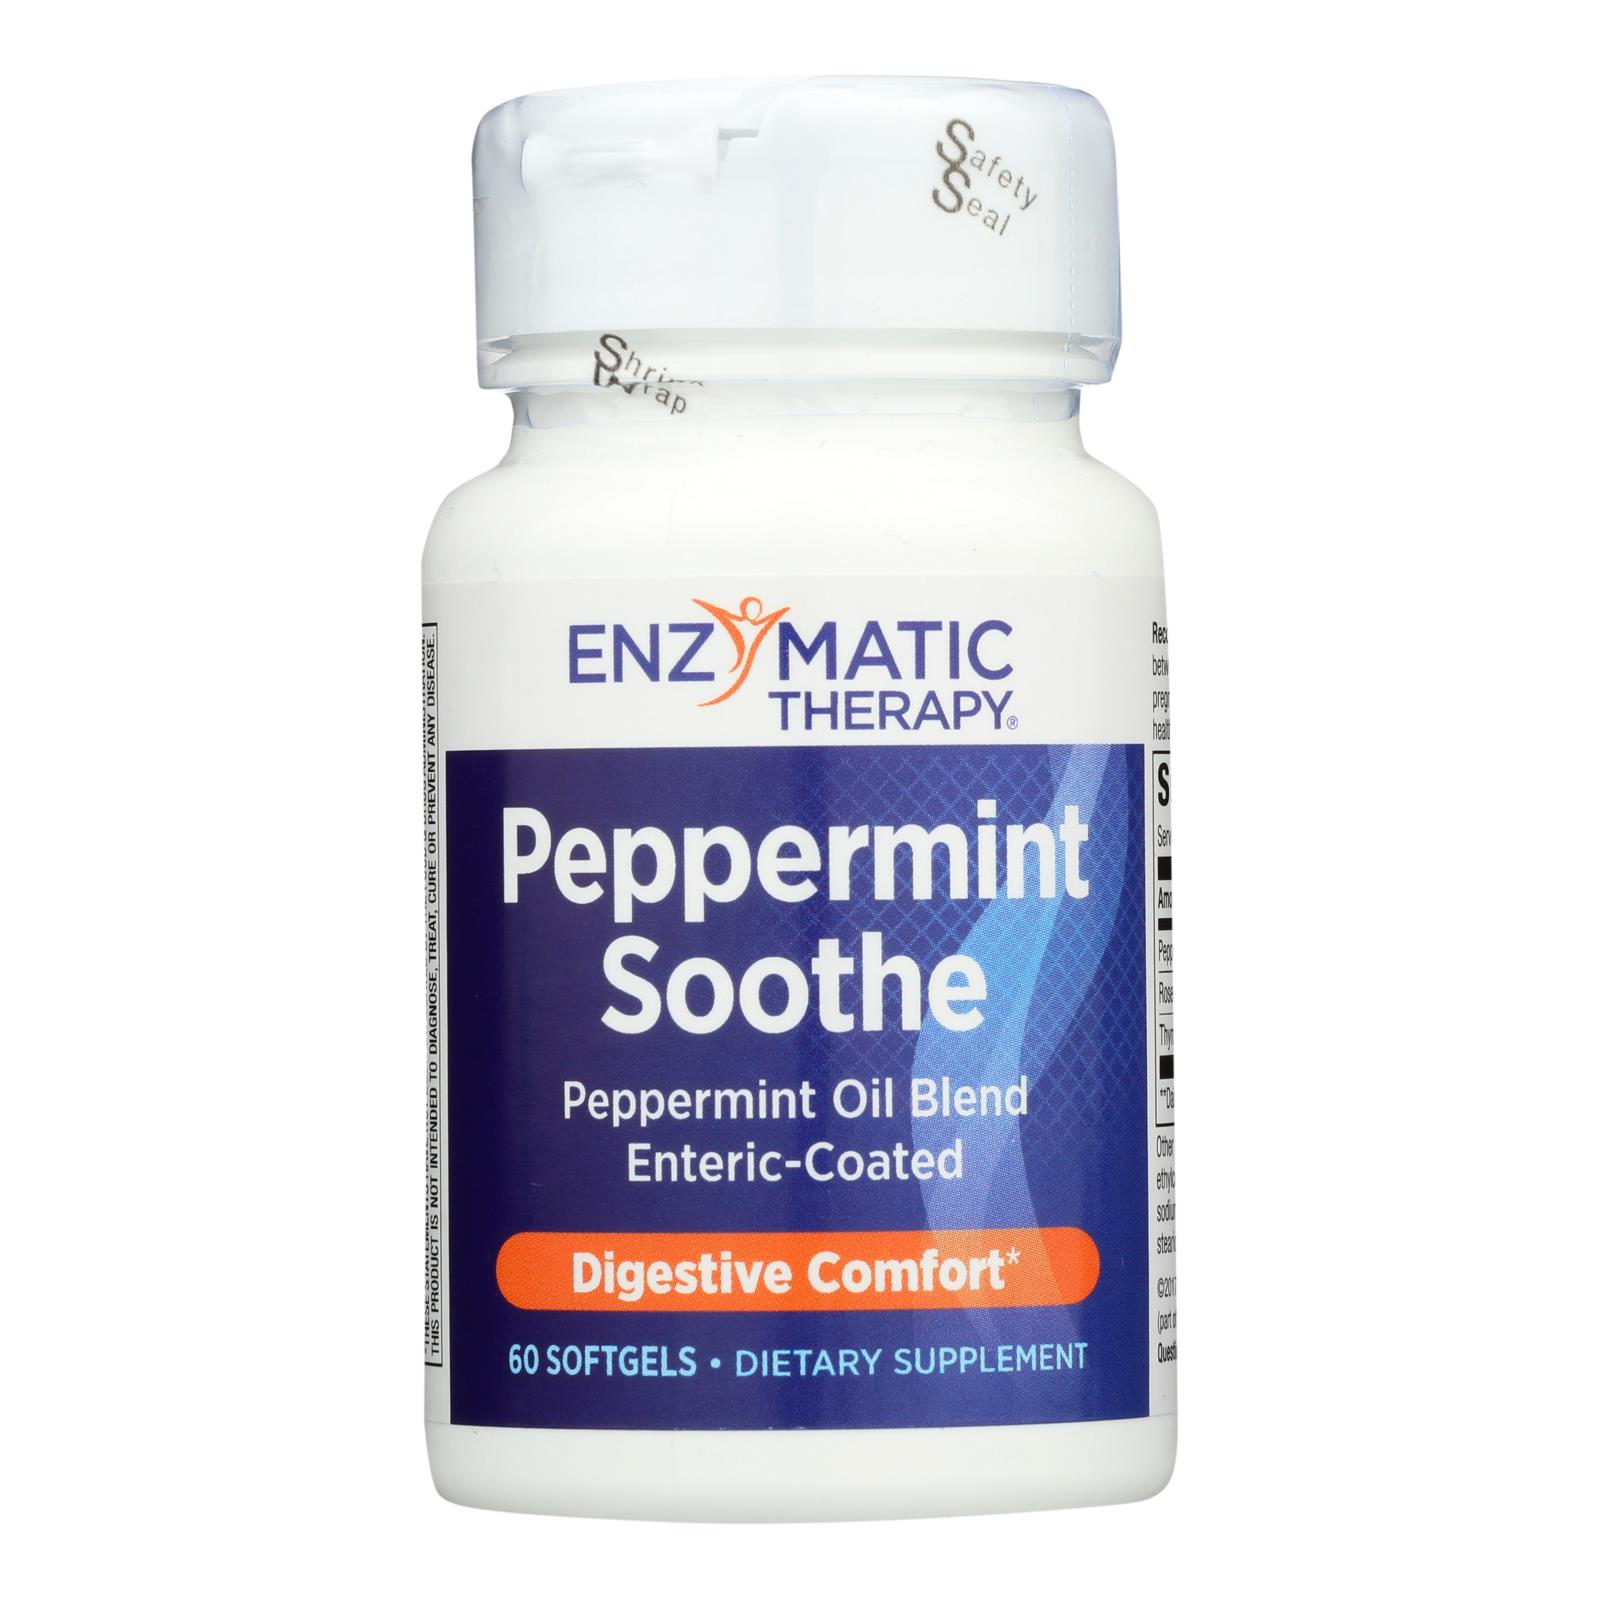 Enzymatic Therapy Peppermint Soothe Digestive Comfort Dietary Supplement - 1 Each - 60 SGEL